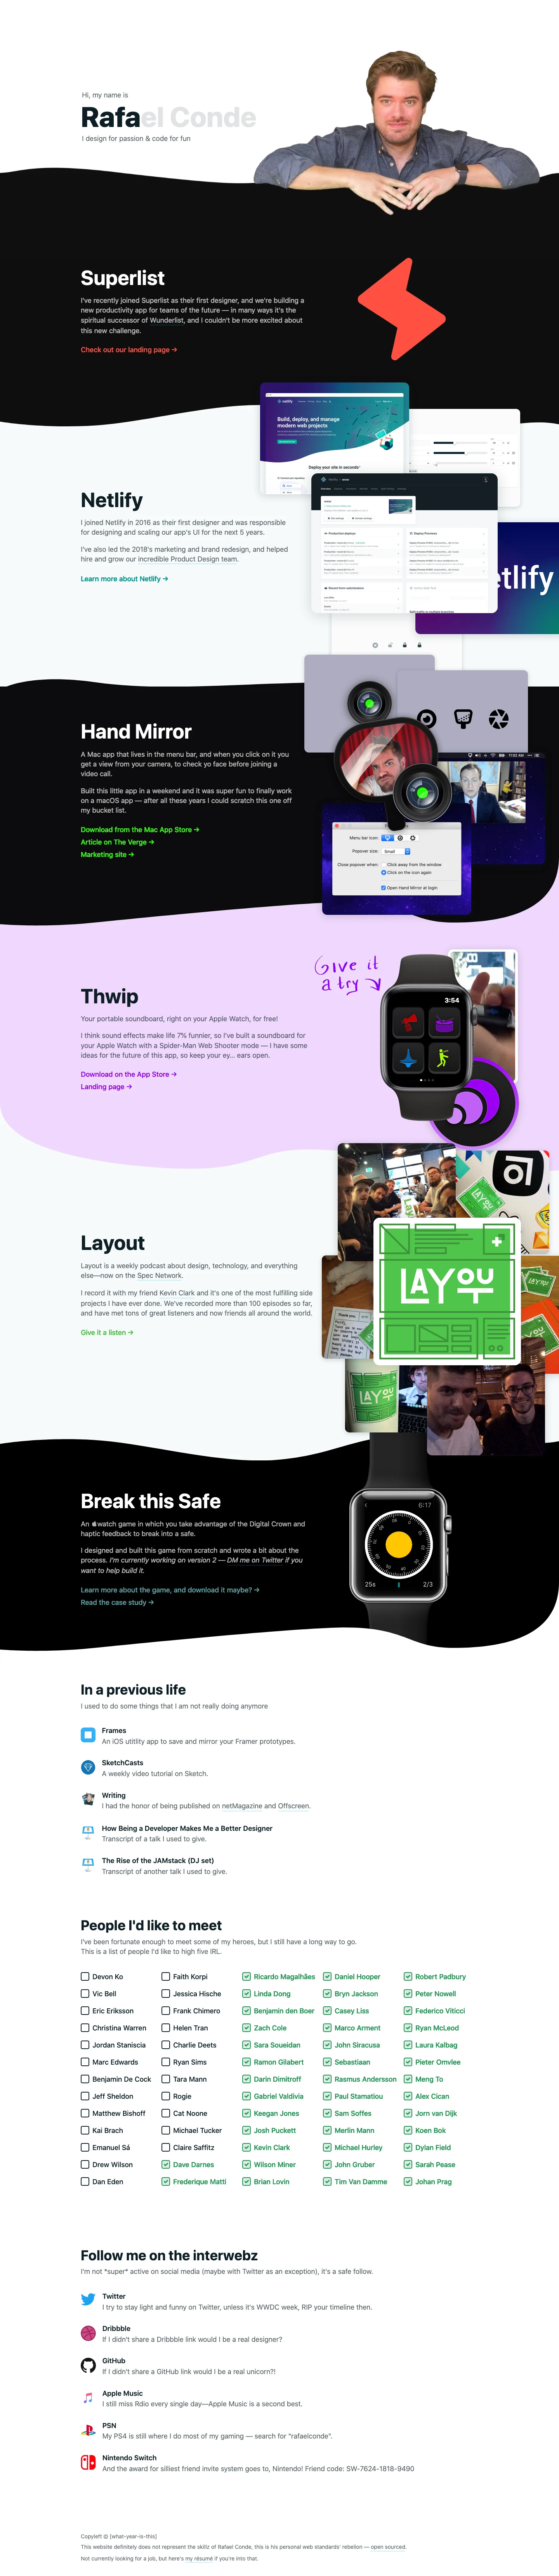 Rafael Conde Landing Page Example: I design for passion & code for fun.